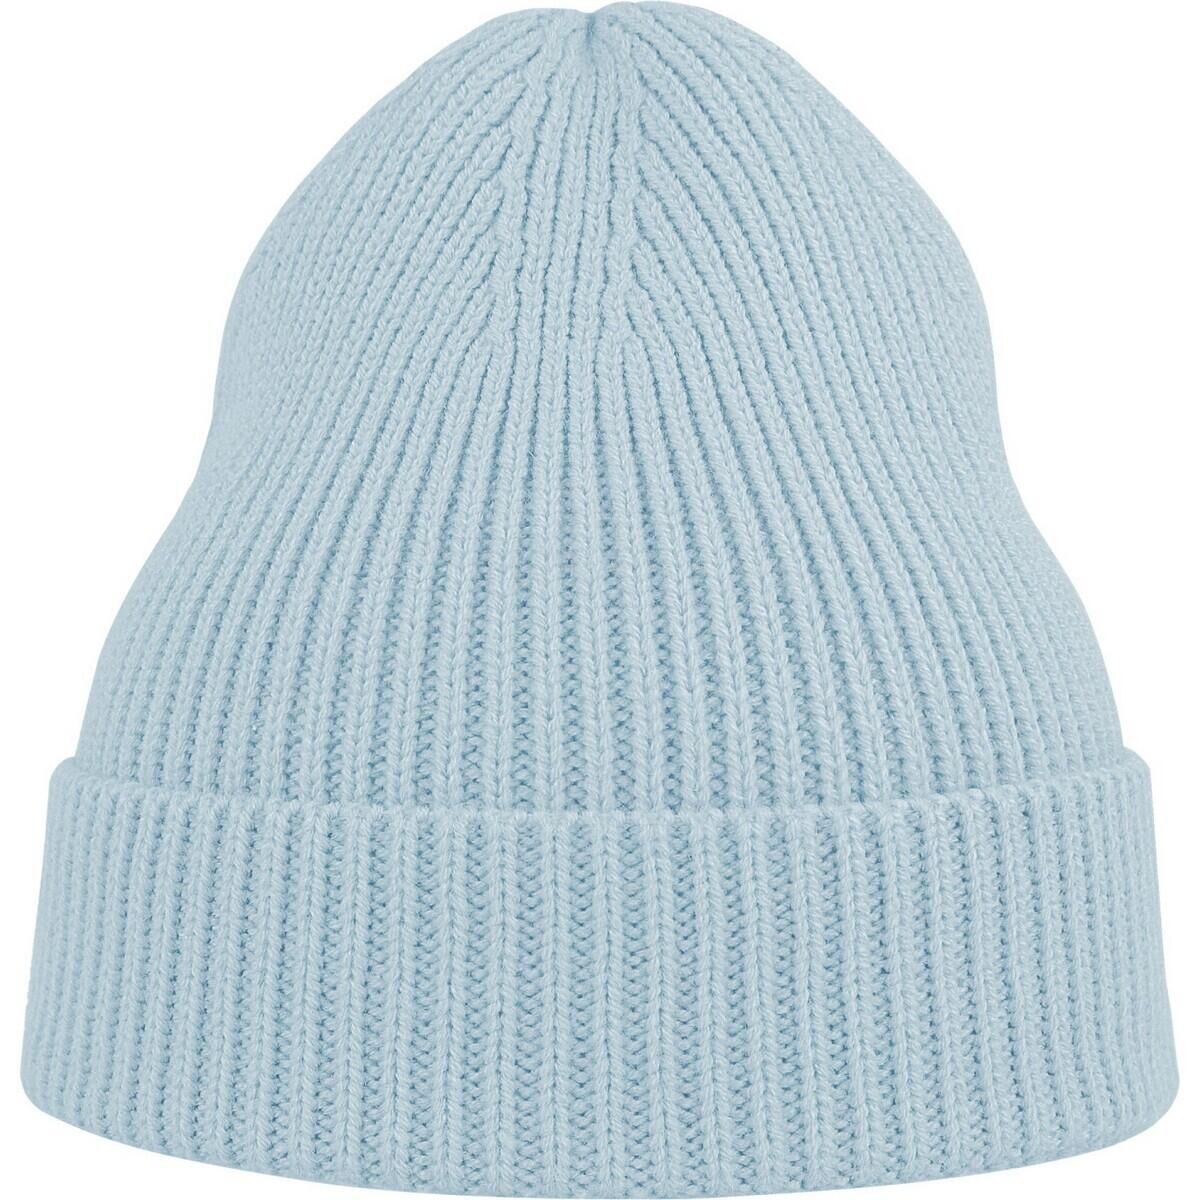 ATLANTIS Unisex Adult Andy Recycled Polyester Beanie (Light Blue)